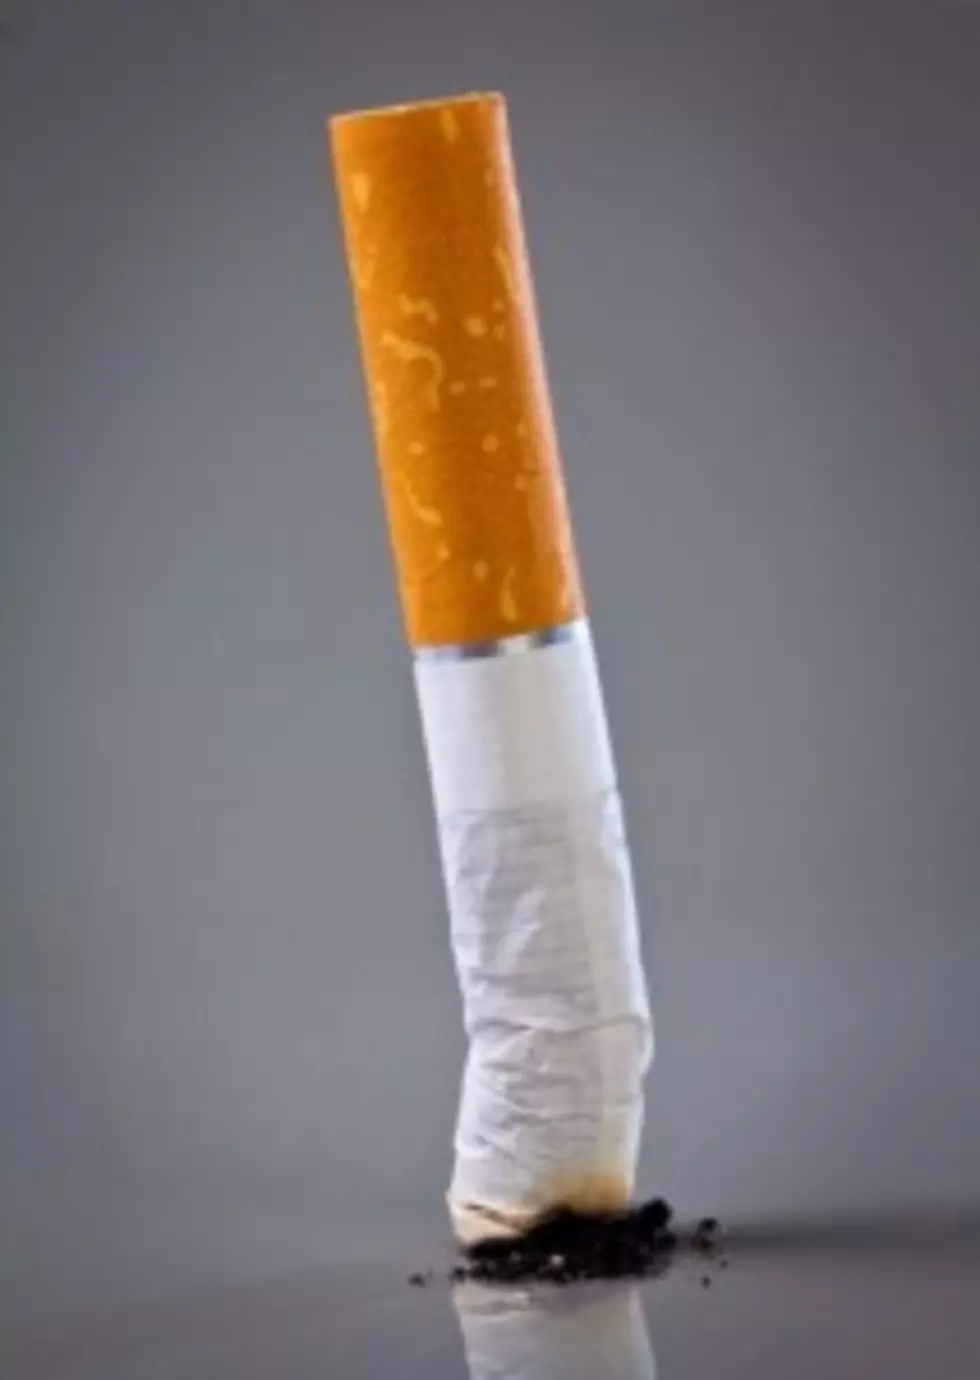 Today is THE Hardest Day if You Quit Smoking in 2014